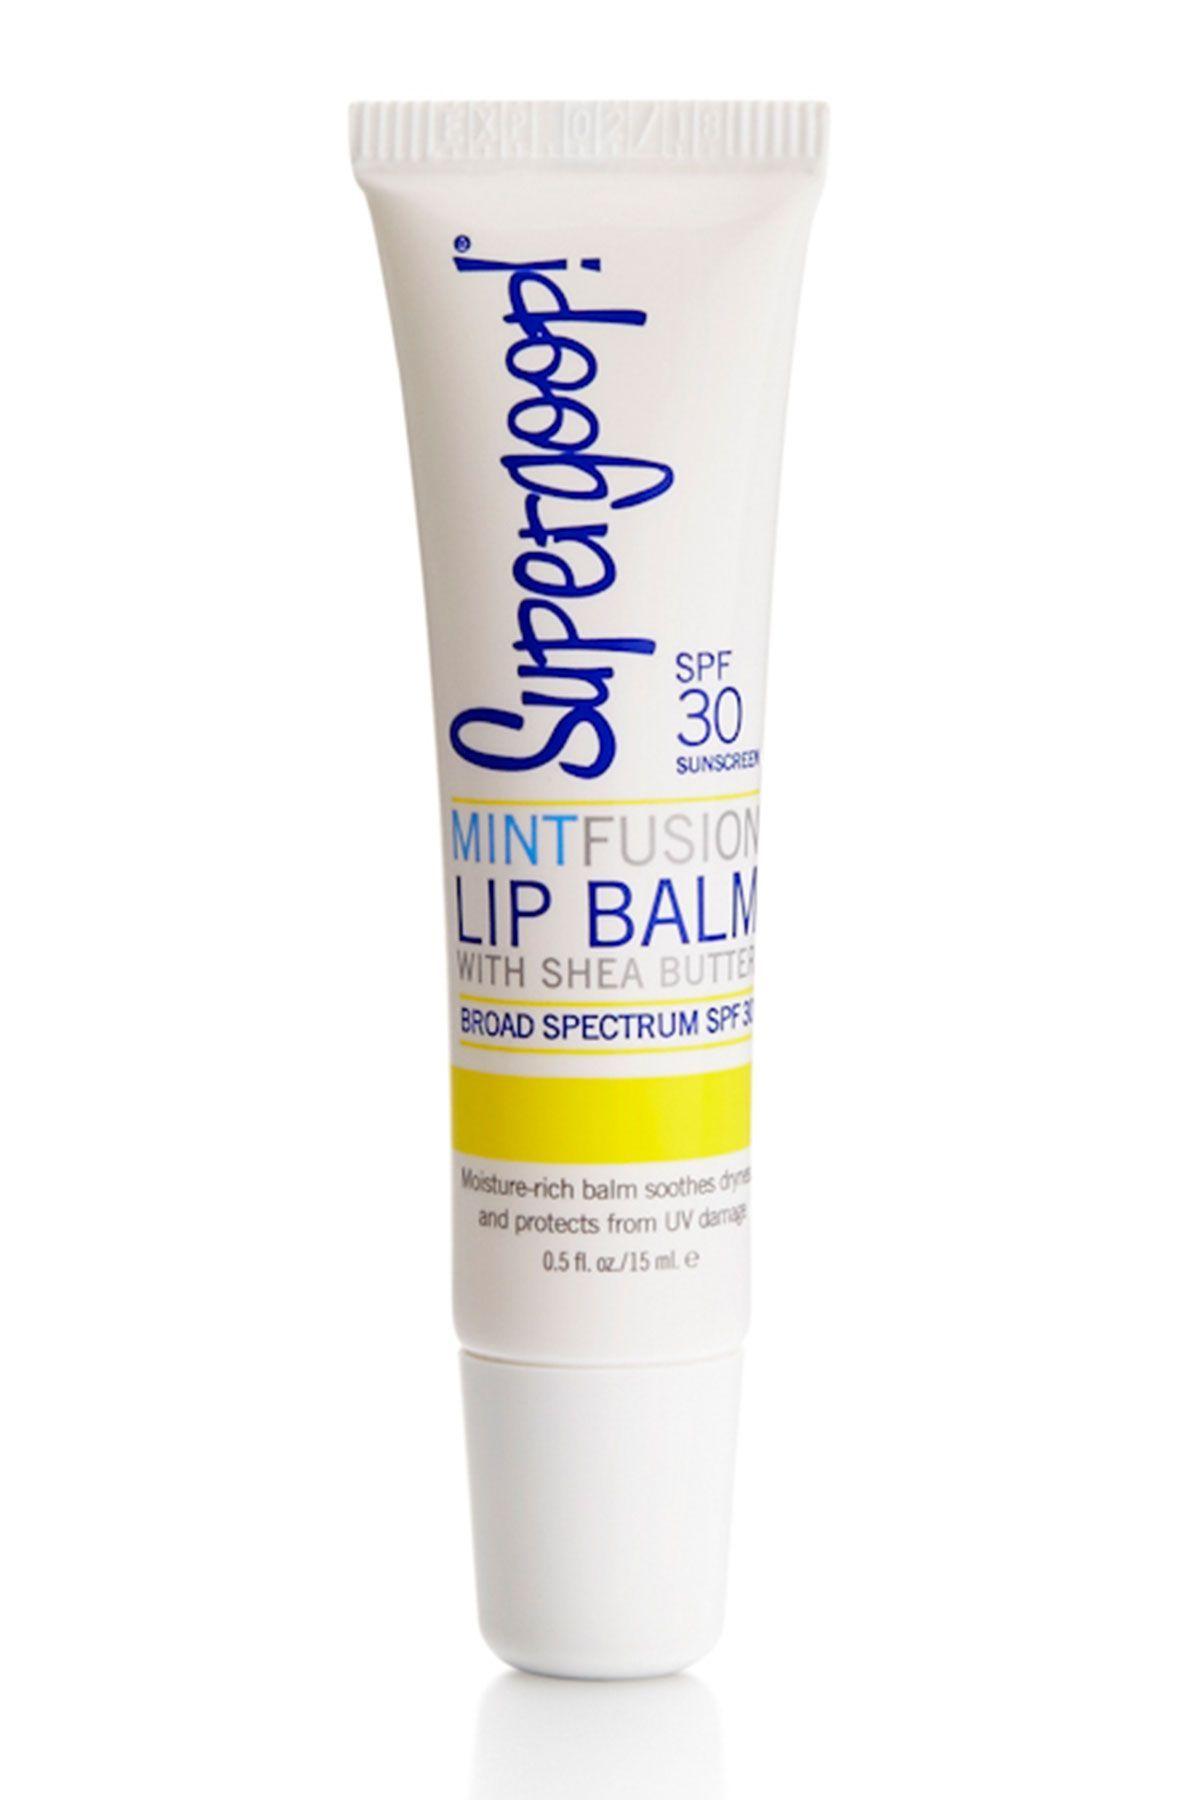 Mint Fusion Lip Balm with Shea Butter Broad Spectrum SPF 30